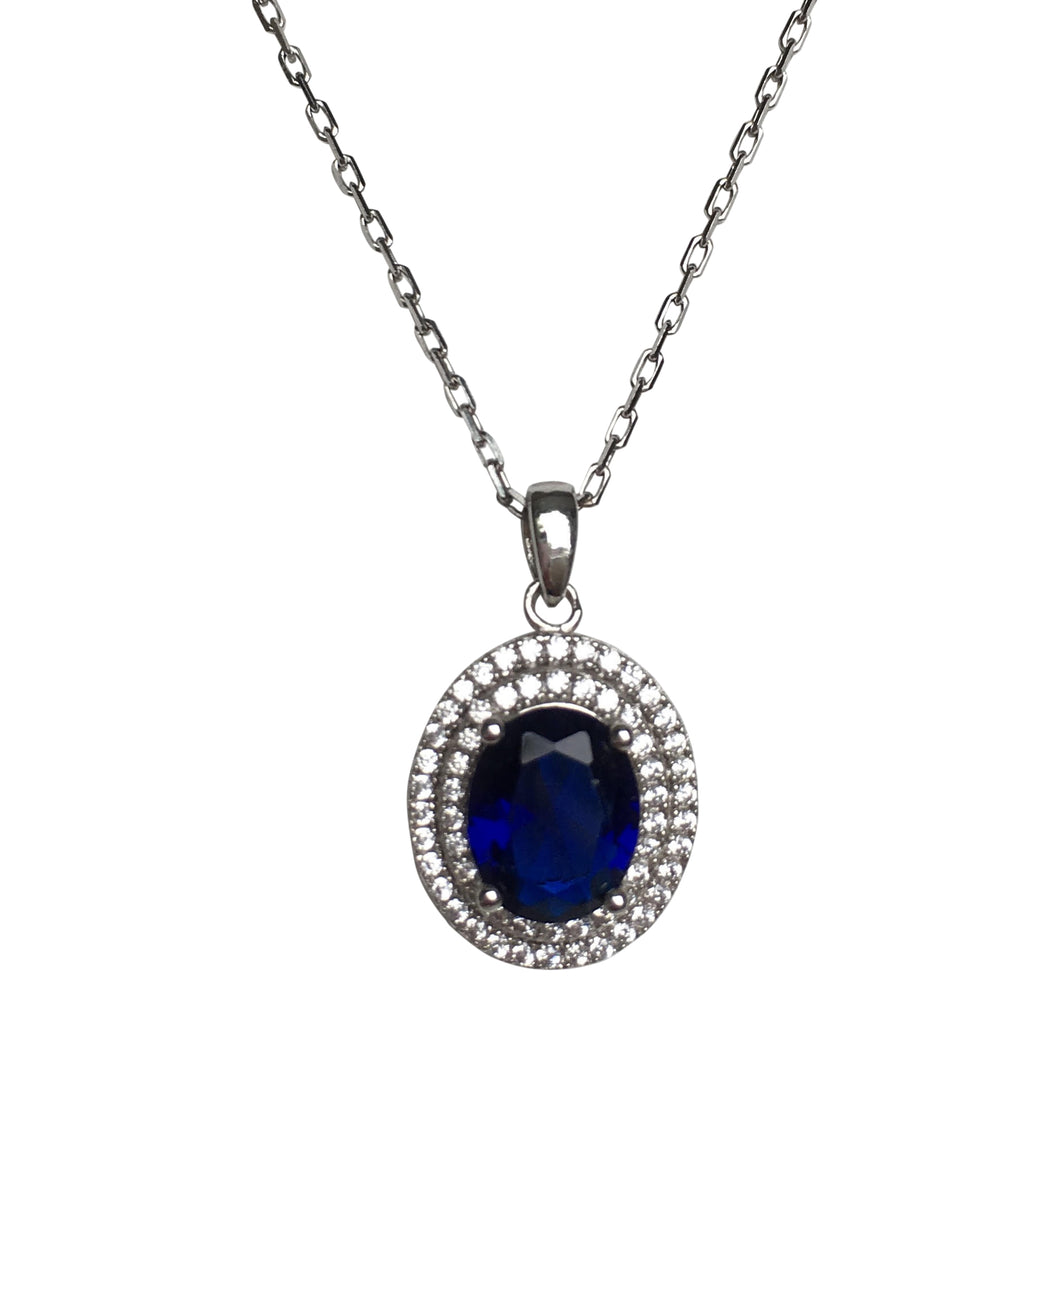 Sterling Silver Pendant with cubic zirconia sapphire centre stone on 18